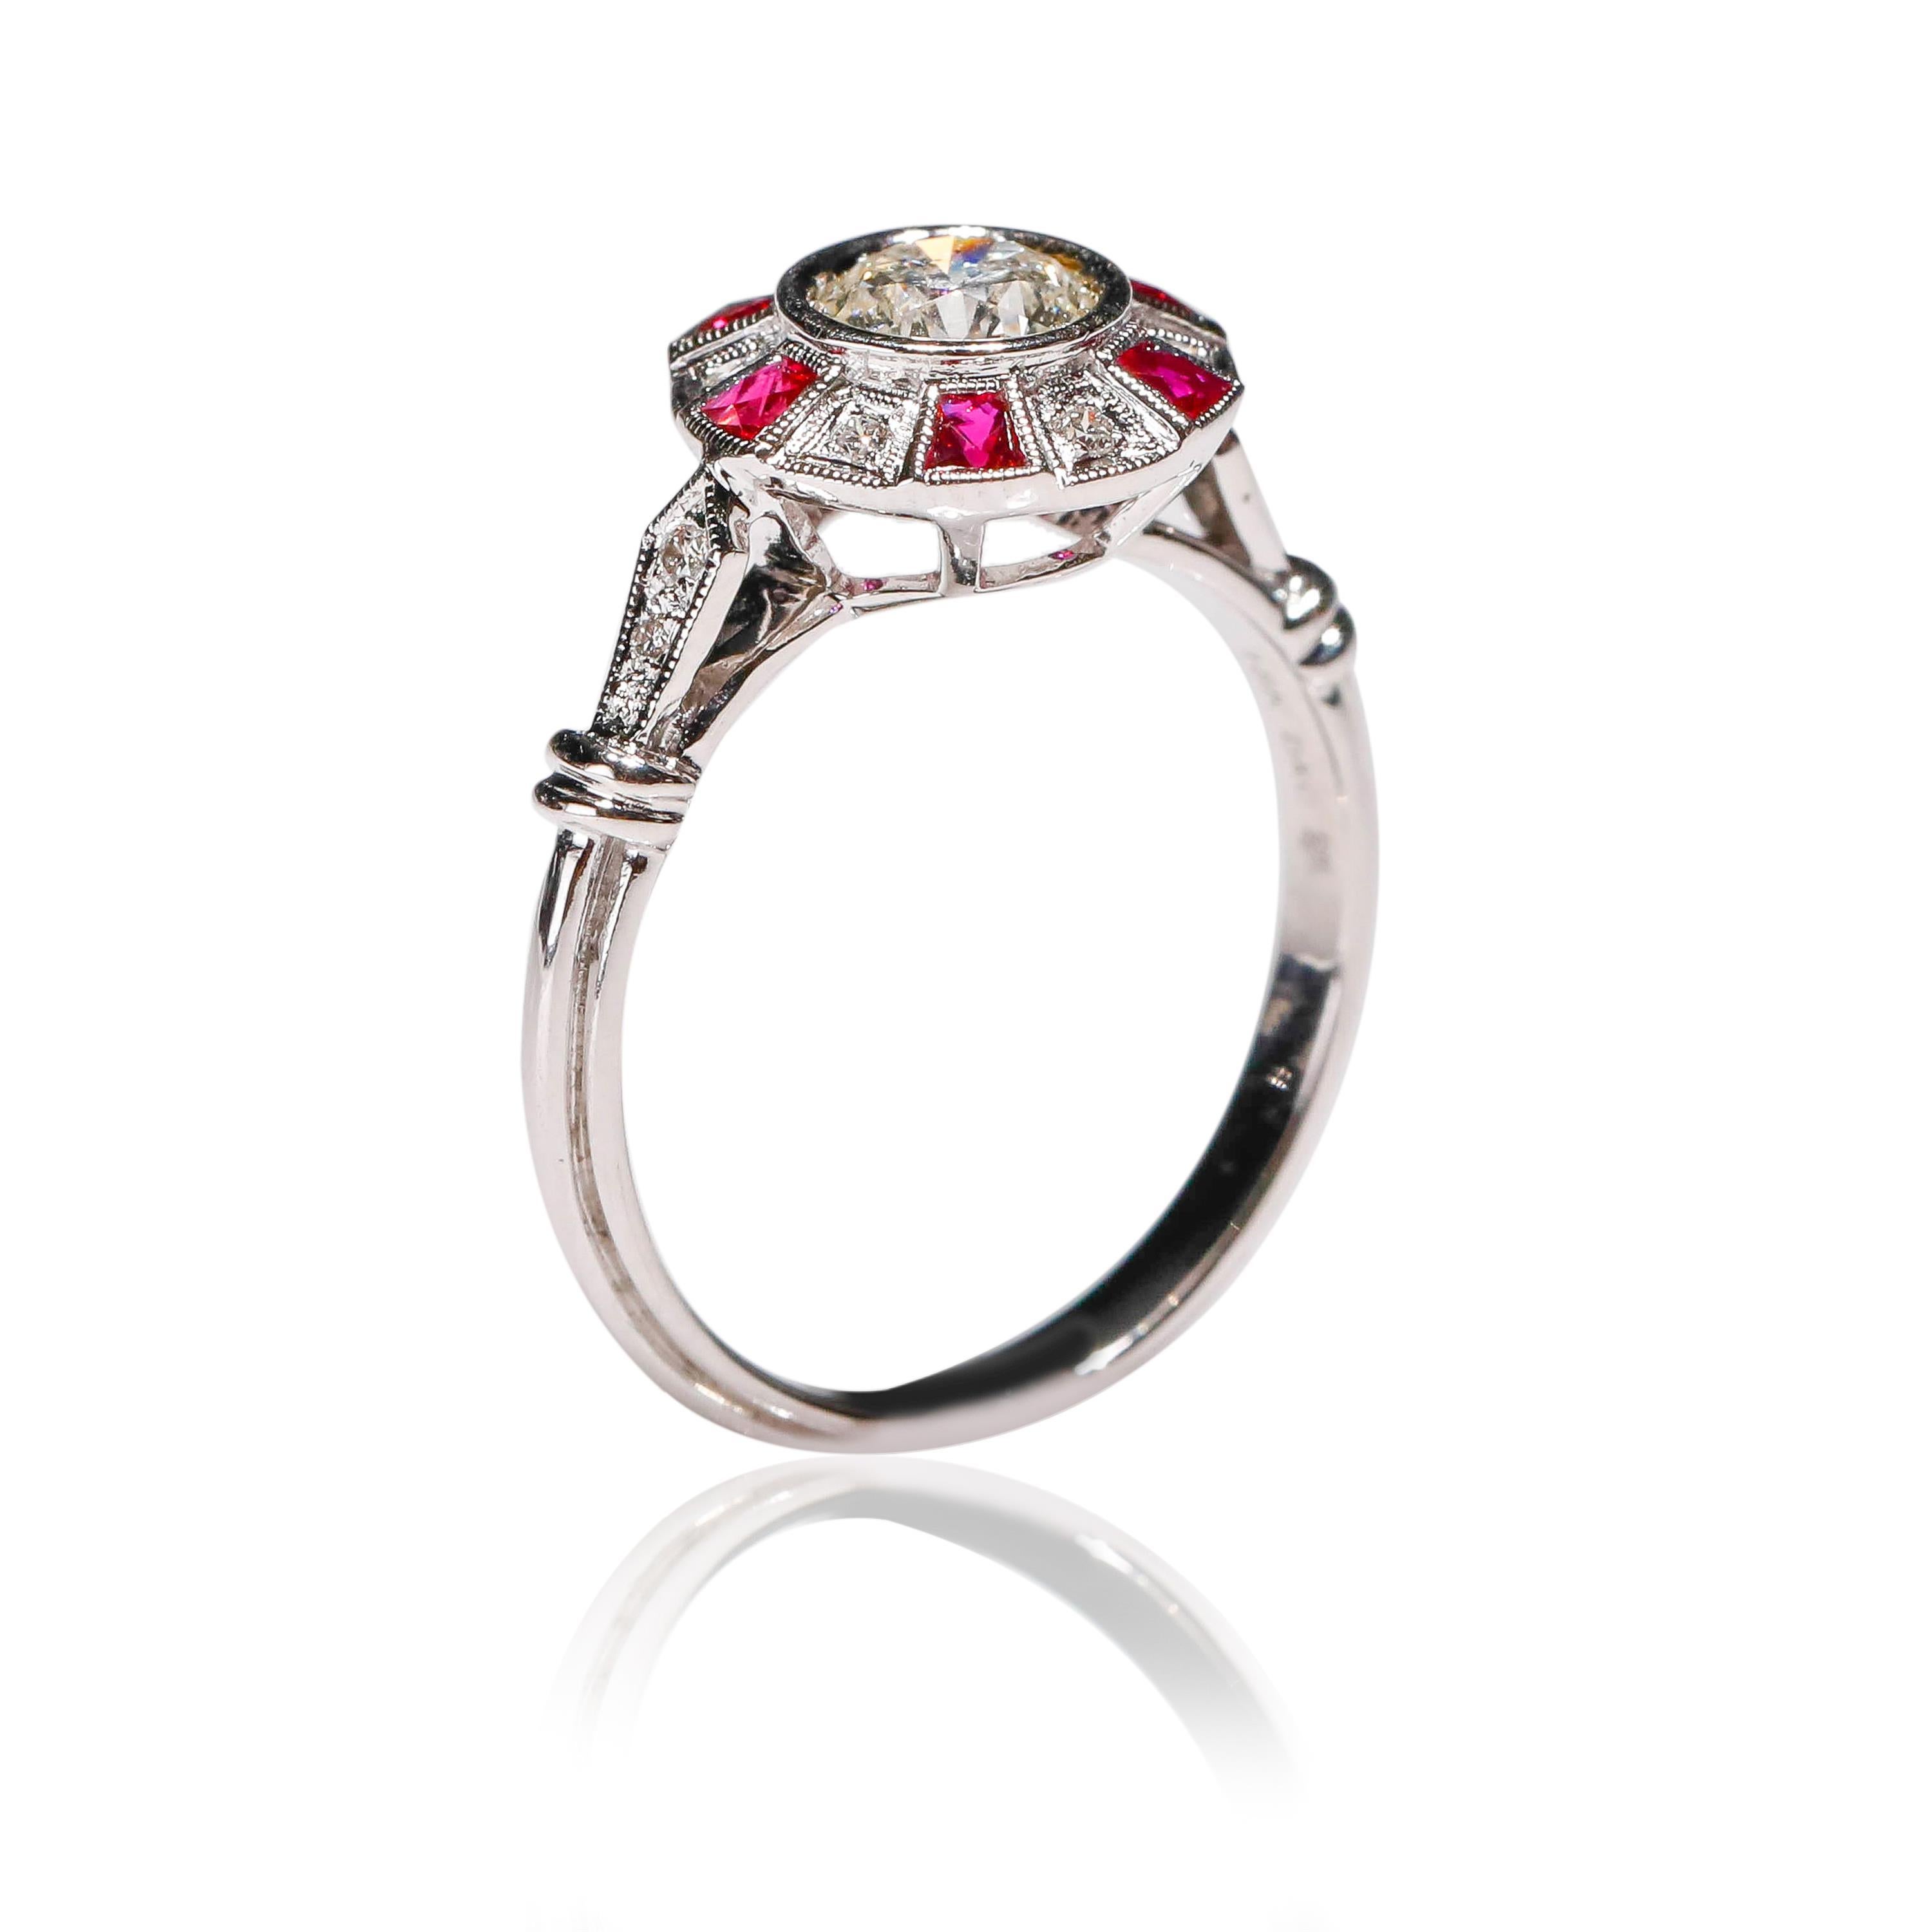 0.27 Ct Ruby 0.85 Ct Diamond 18Kt White Gold Round Cocktail Halo Ring

Crafted in 18 kt White Gold, this Unique design showcases a Ruby 0.27 TCW,  set in a halo of round-cut mesmerizing diamonds, Polished to a brilliant shine.

Gold Purity: 18